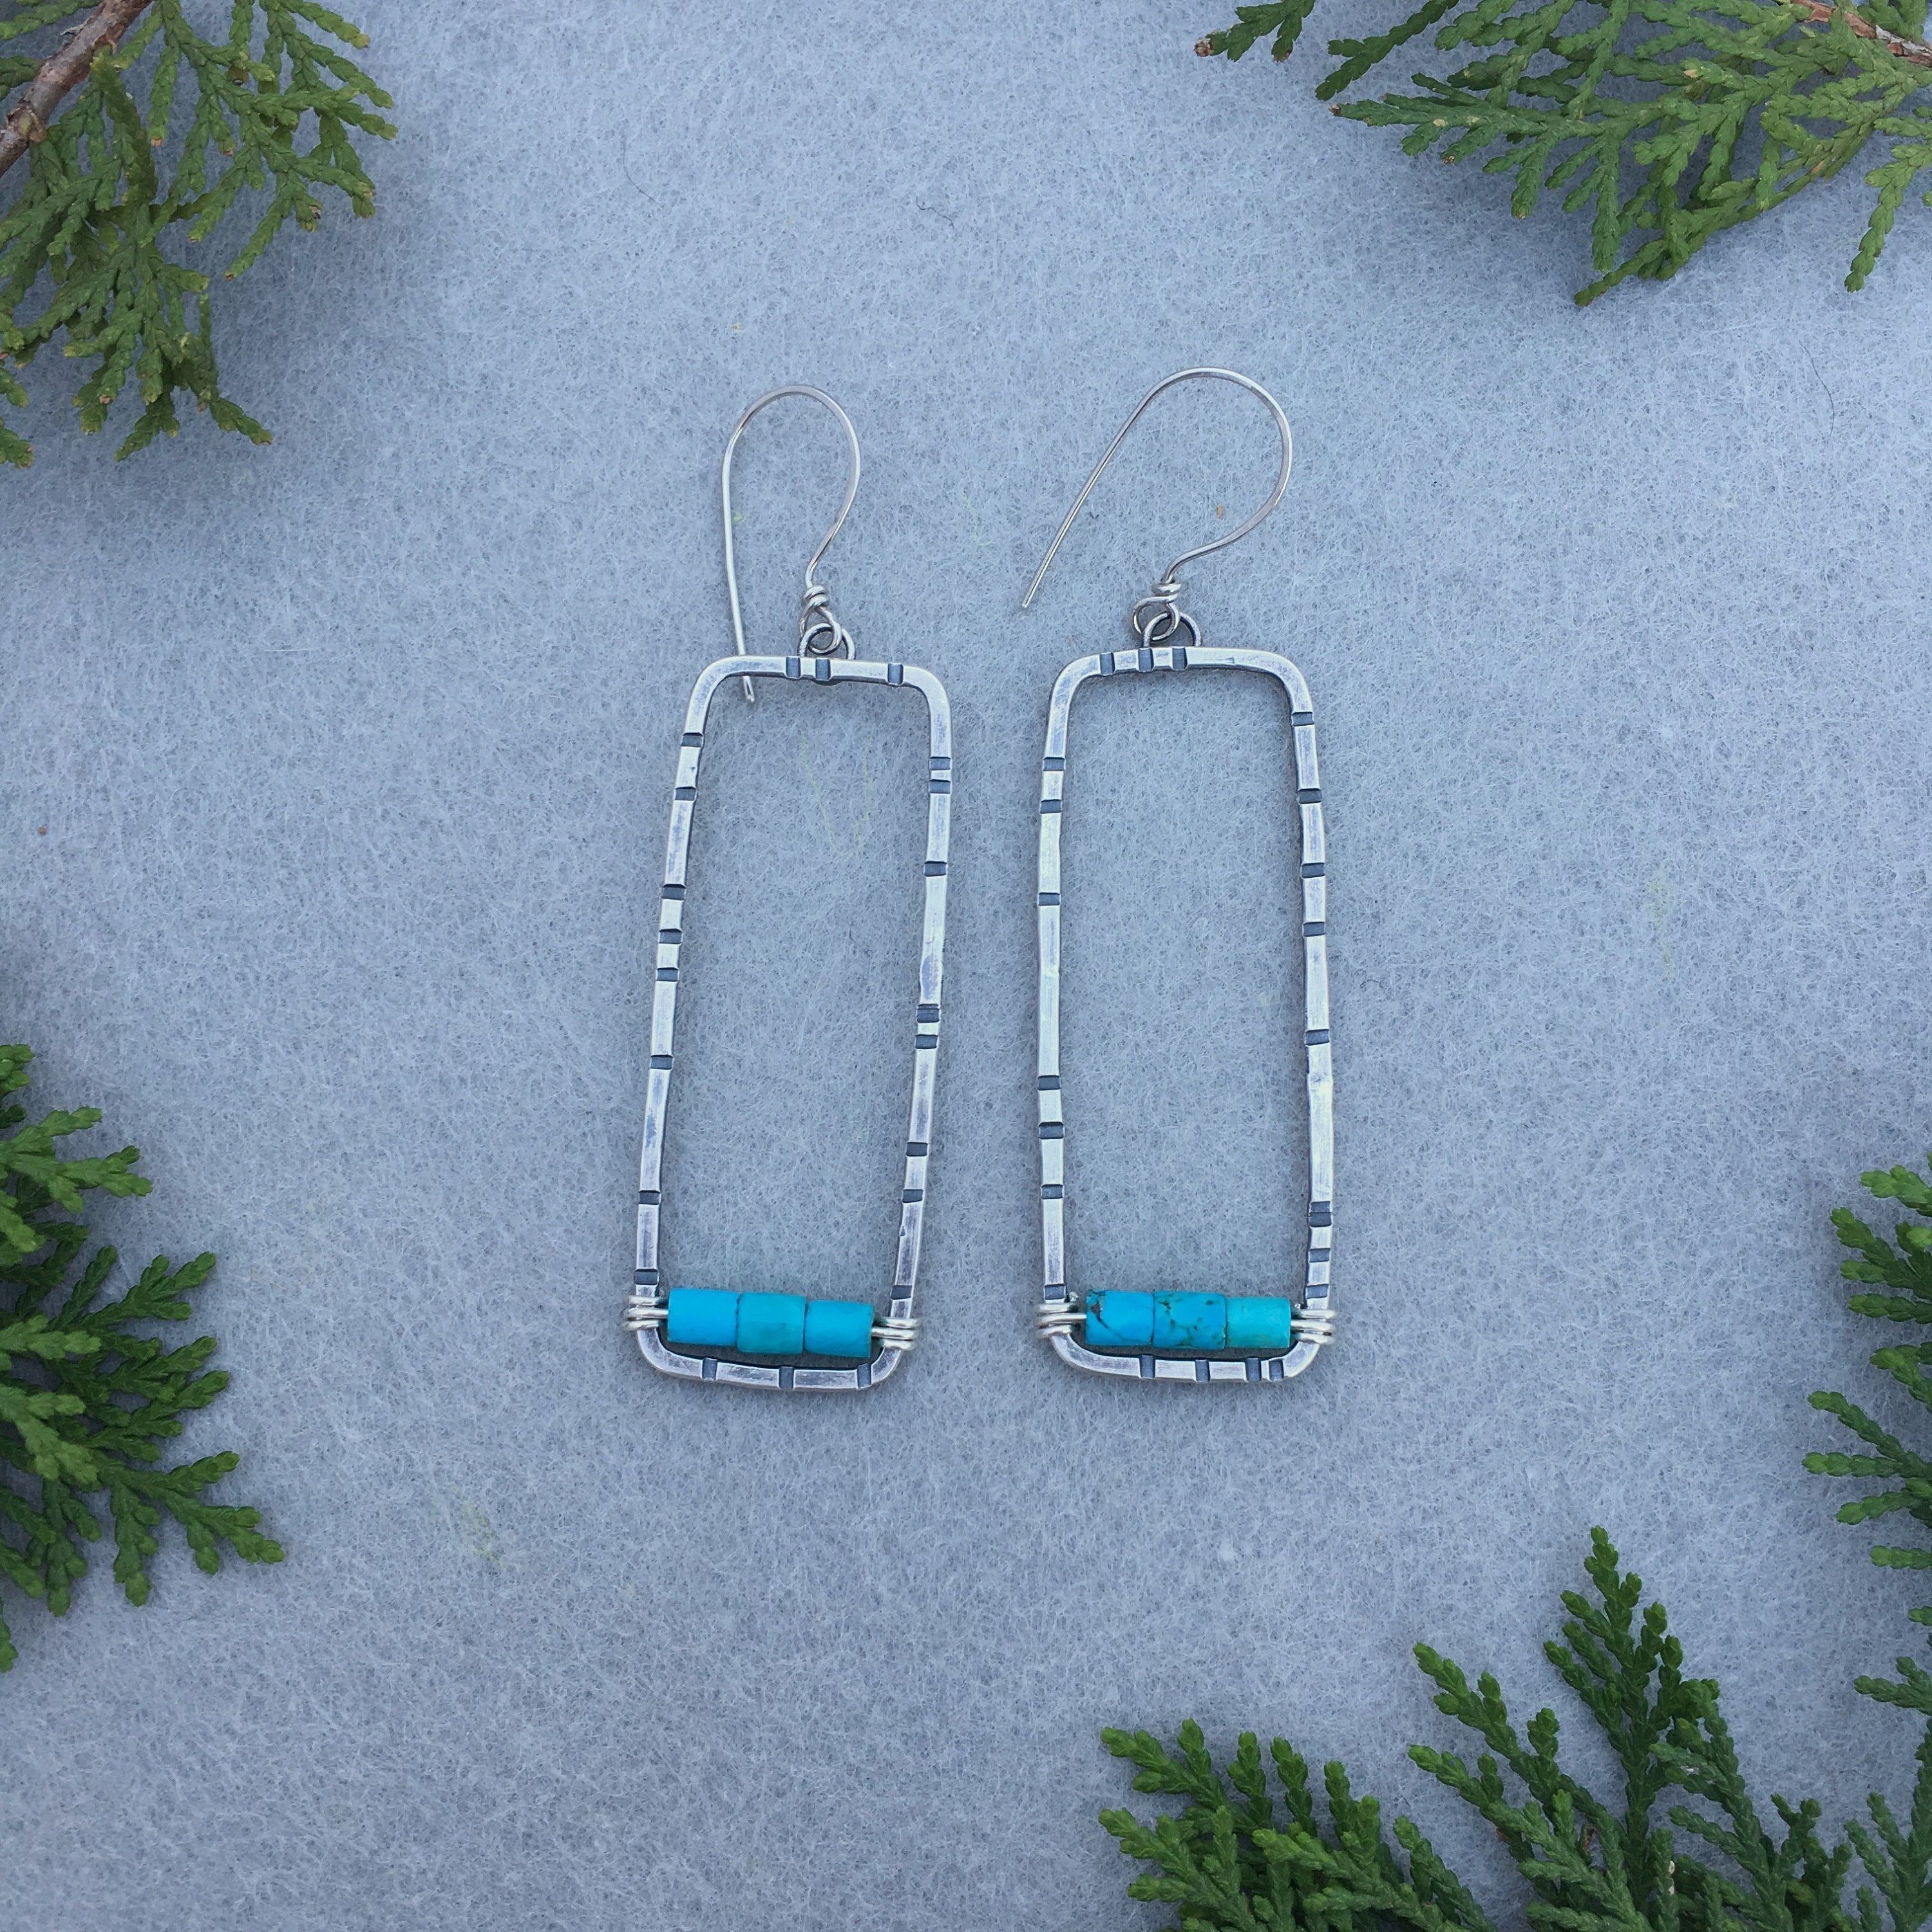 Large Rectangular Anvil Hoop Earrings with Stamped Sterling Silver and Genuine Turquoise - MADE TO ORDER